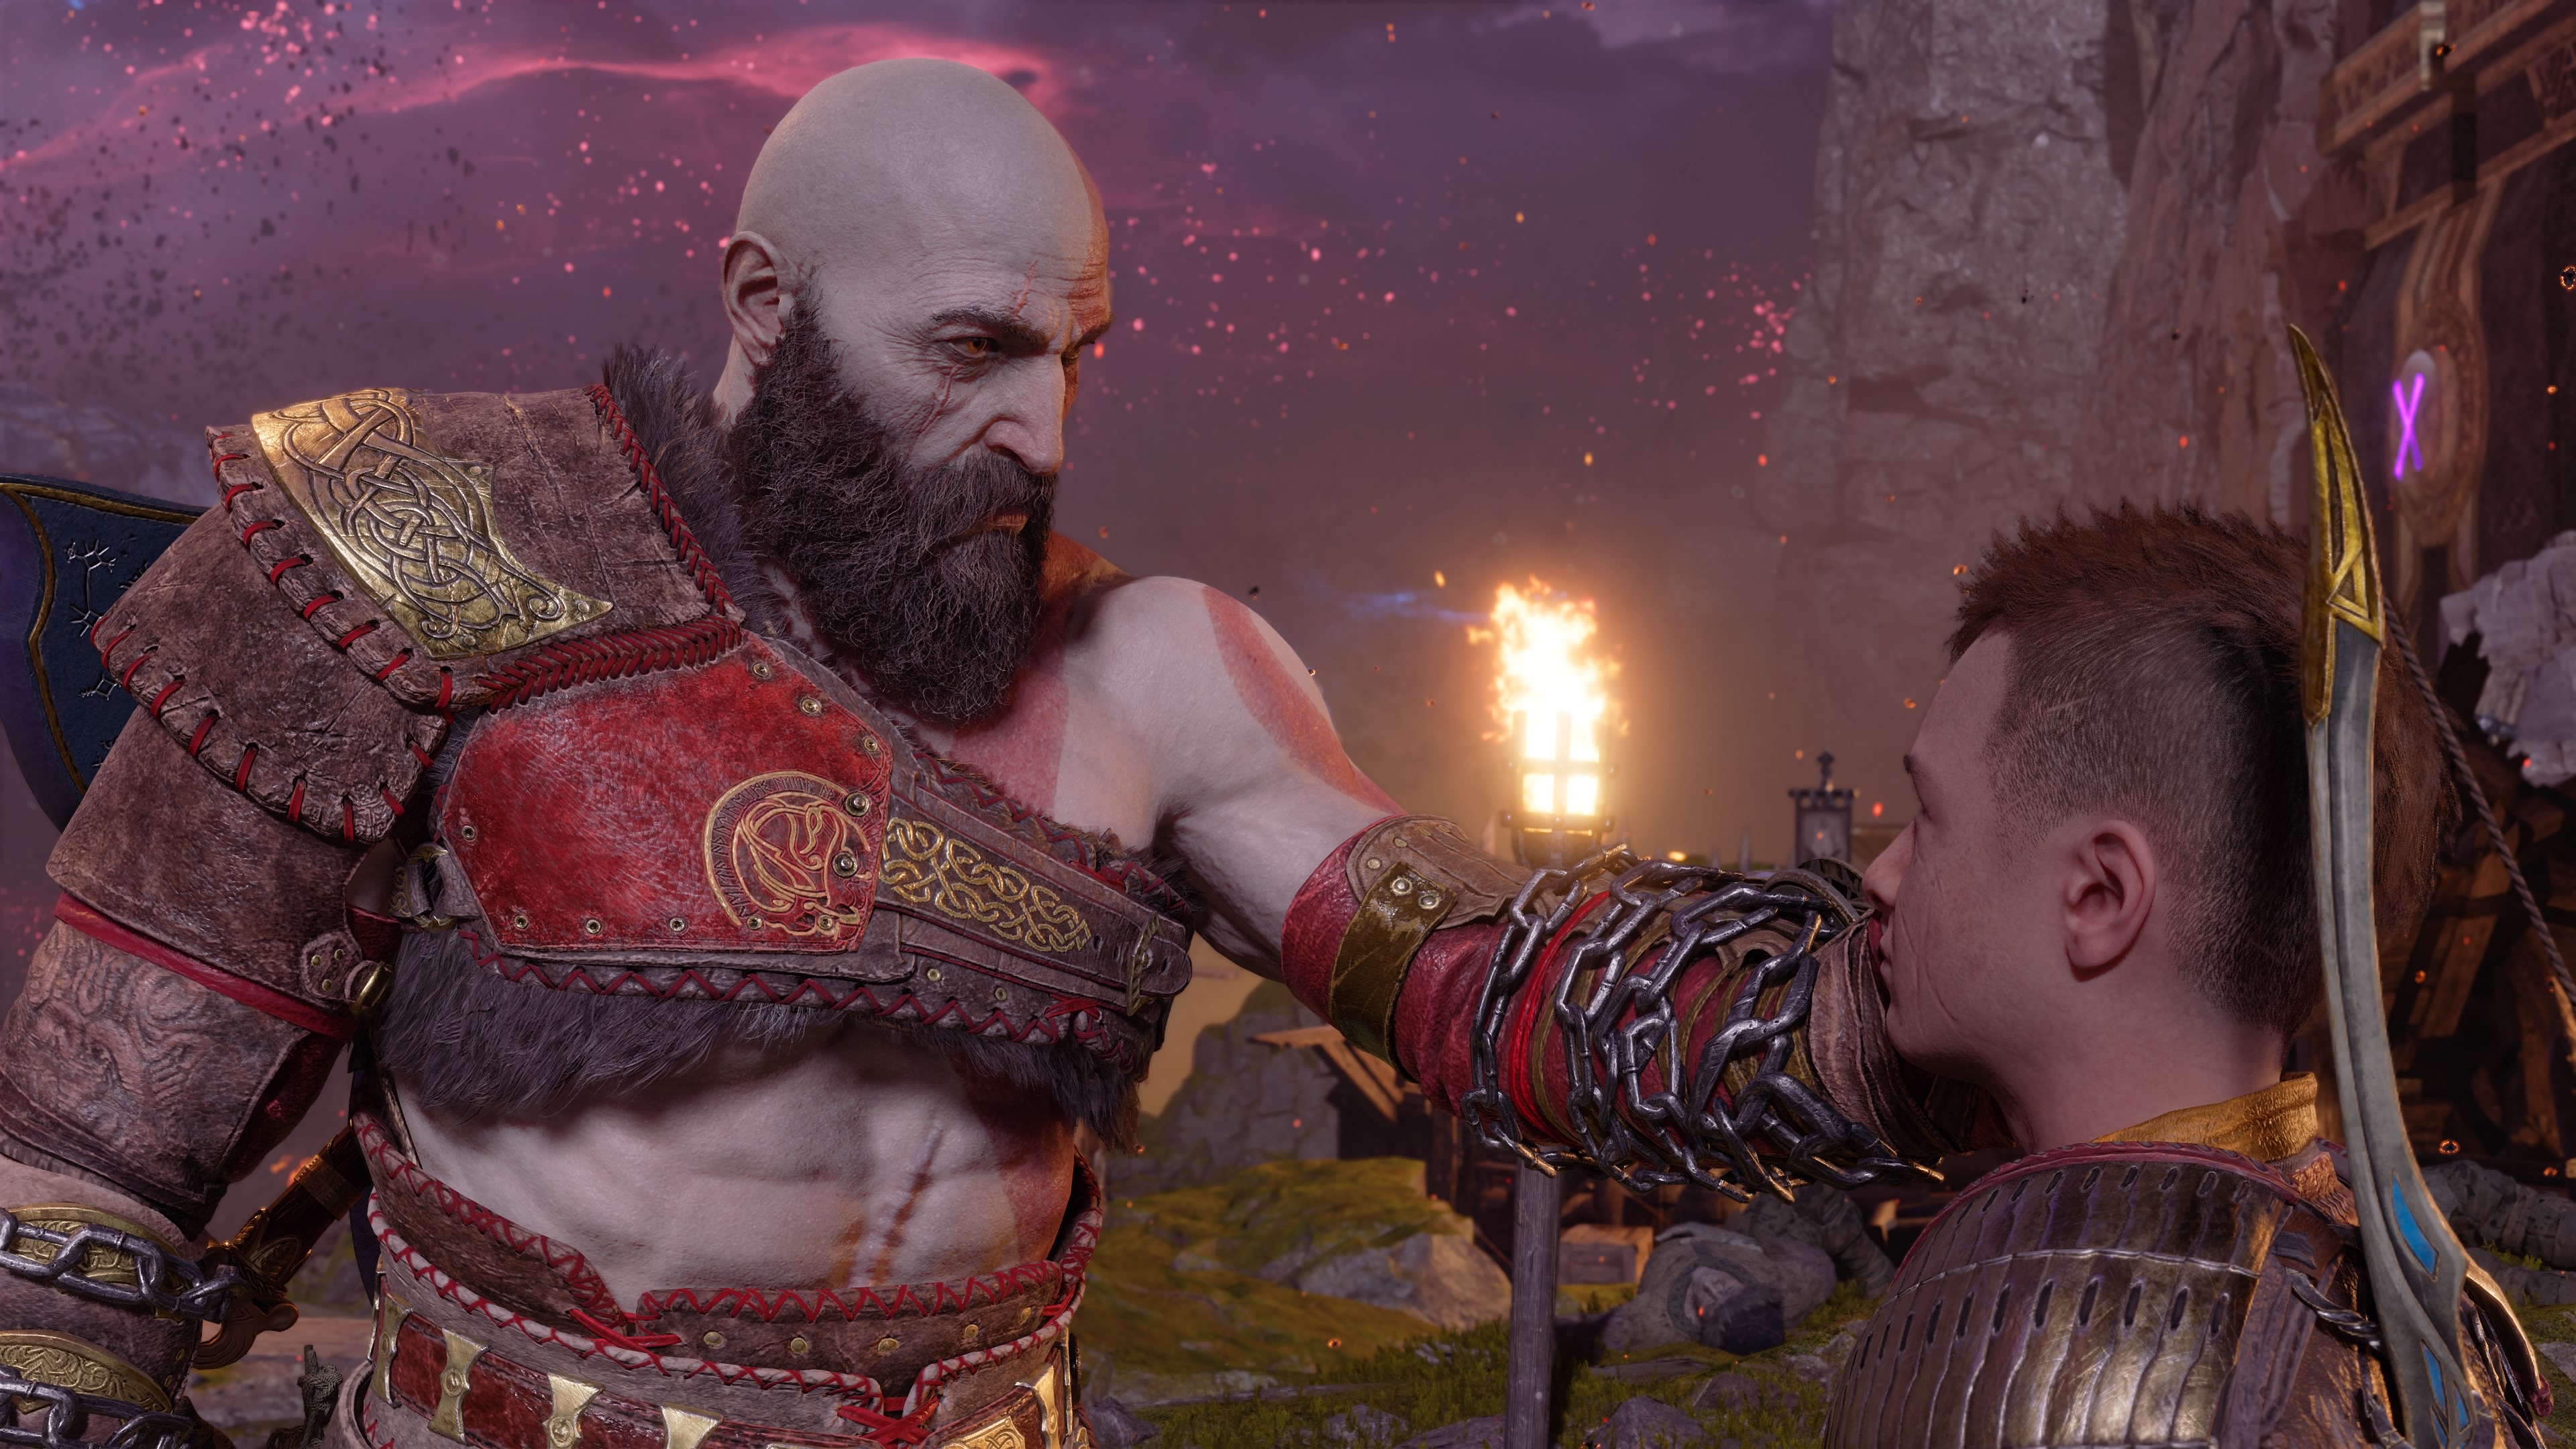 how long was kratos in the light